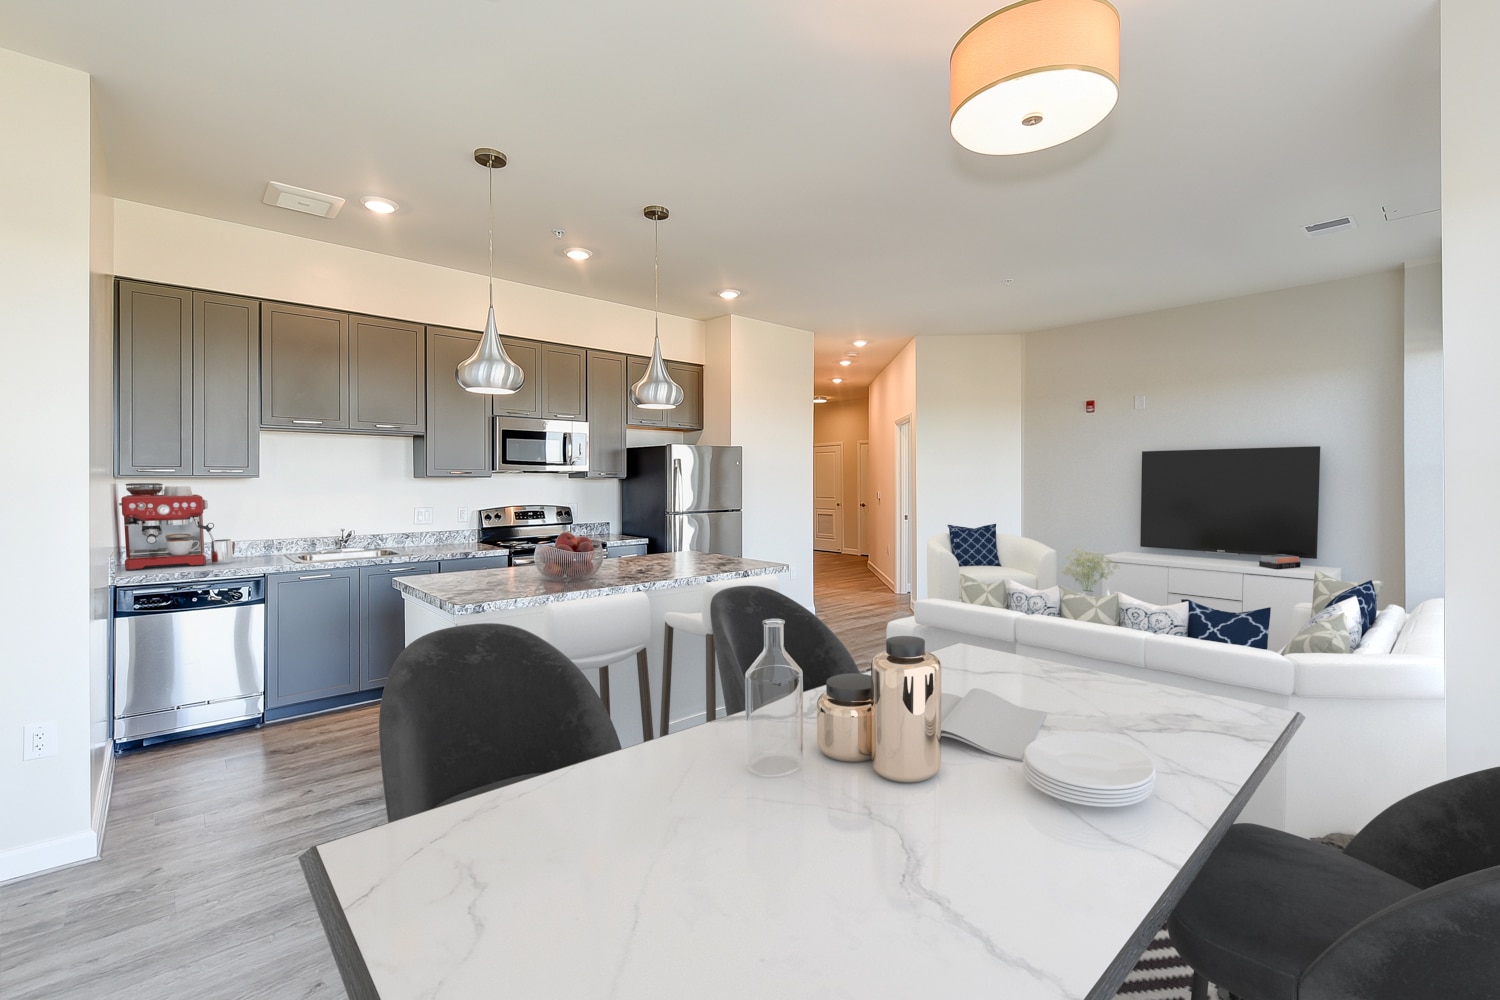 open layout showing living area, dining area and kitchen at city view apartments in washington dc